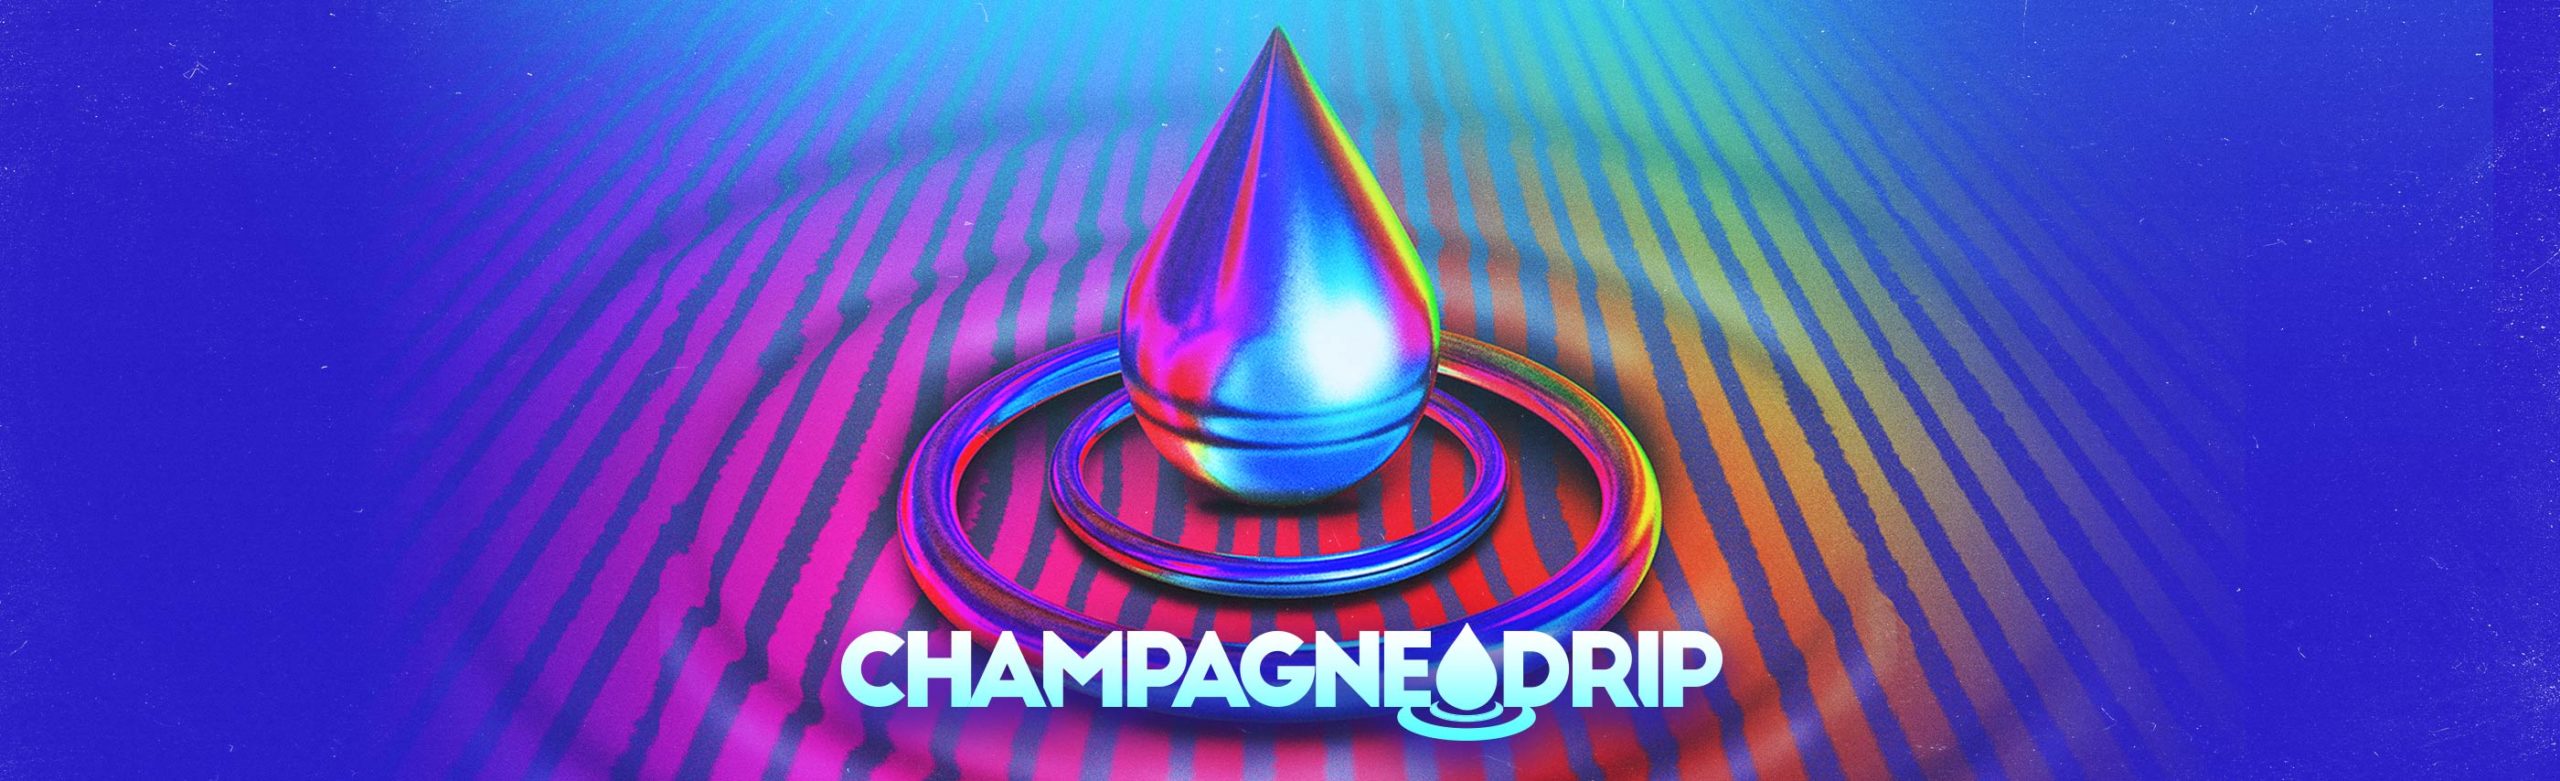 Event Info: Champagne Drip at The ELM 2022 Image